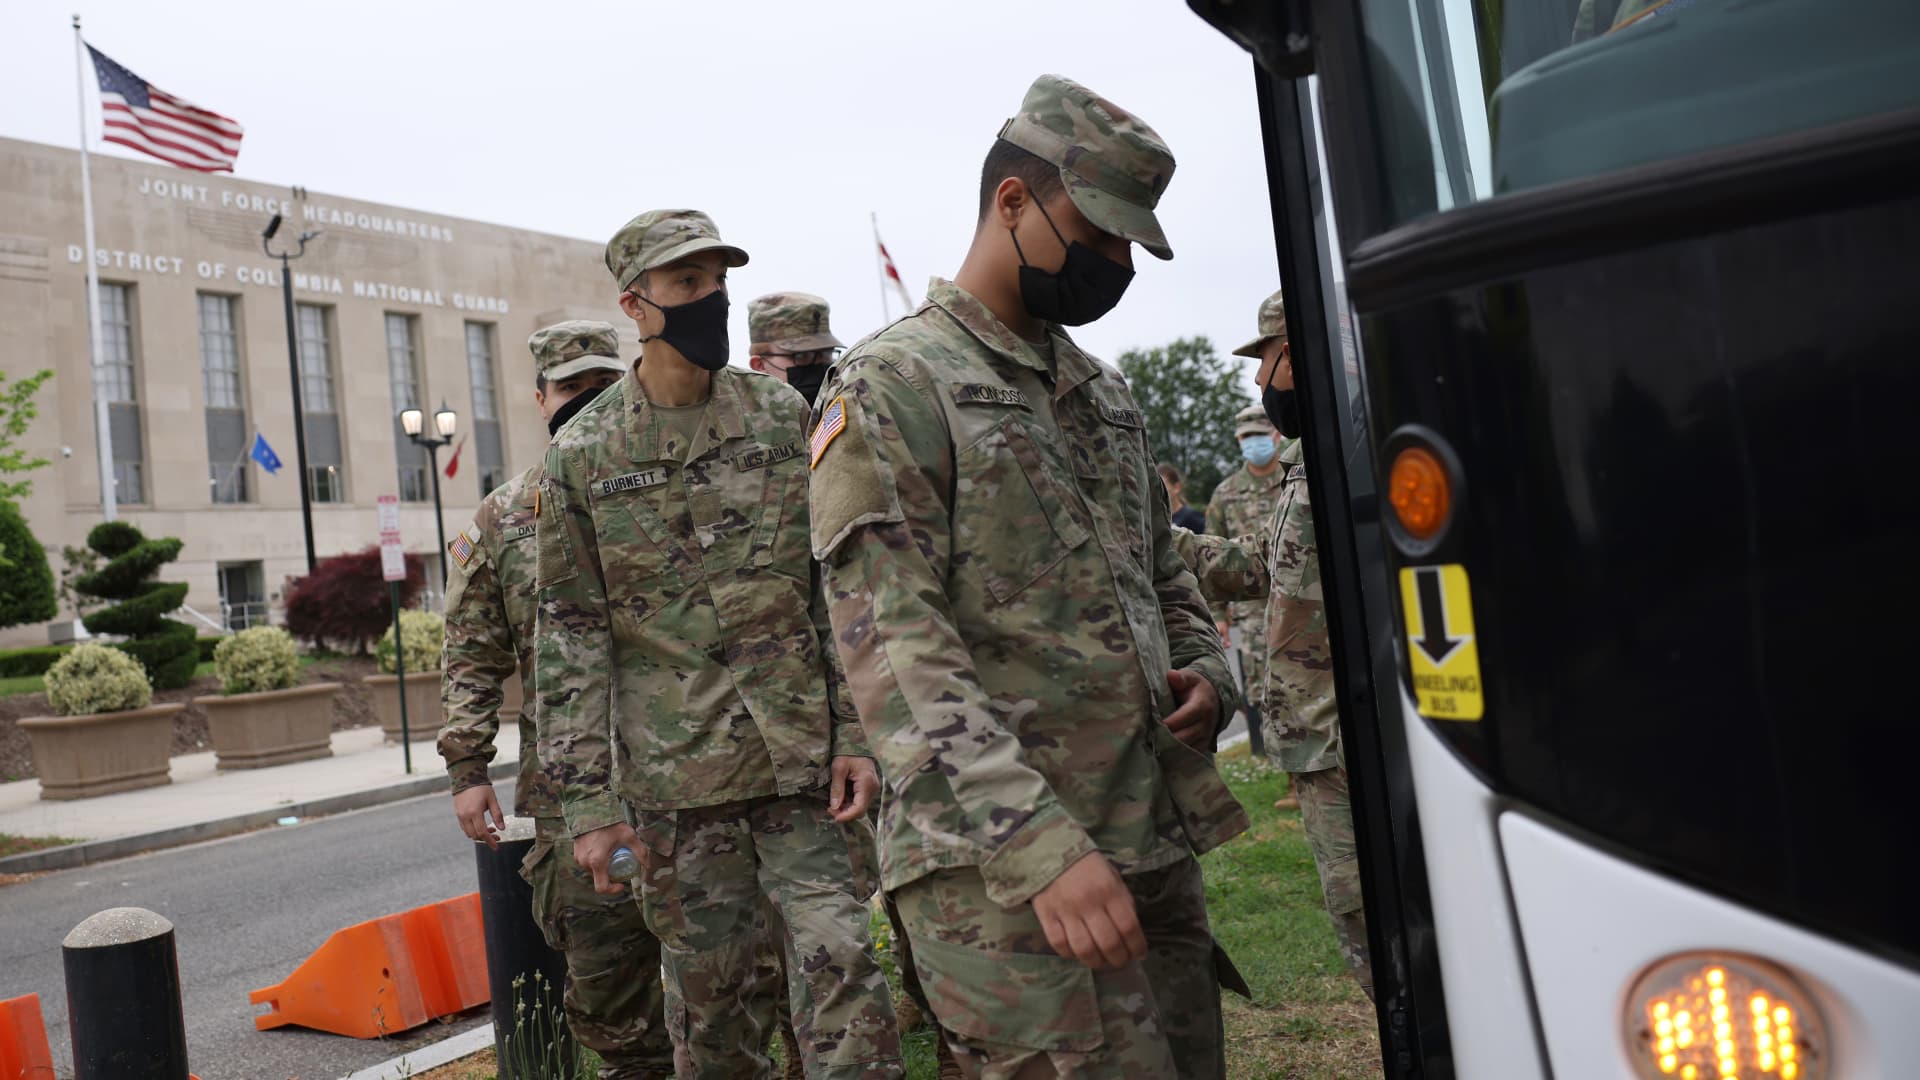 National Guard troops board buses as they leave the Armory after ending their mission of providing security to the U.S. Capitol on May 24, 2021 in Washington, DC.